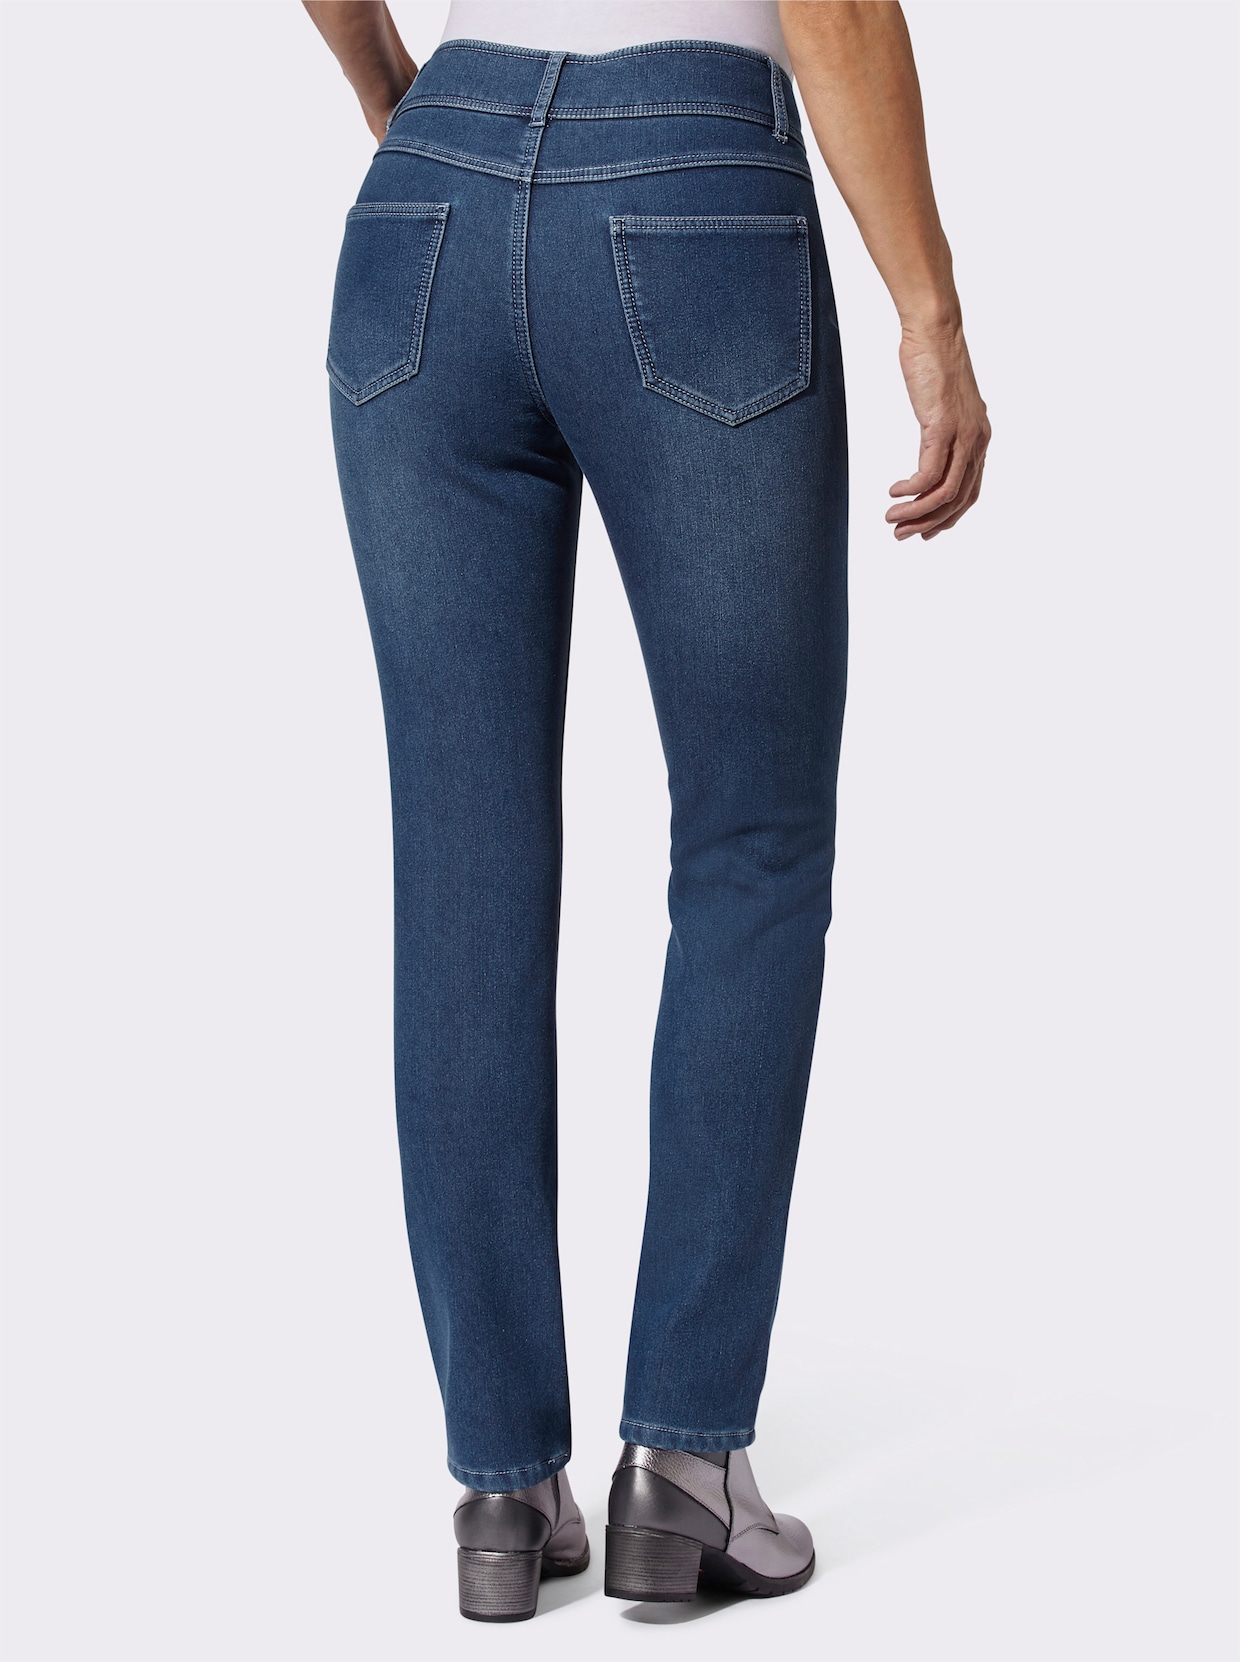 Thermojeans - blue-stonewashed